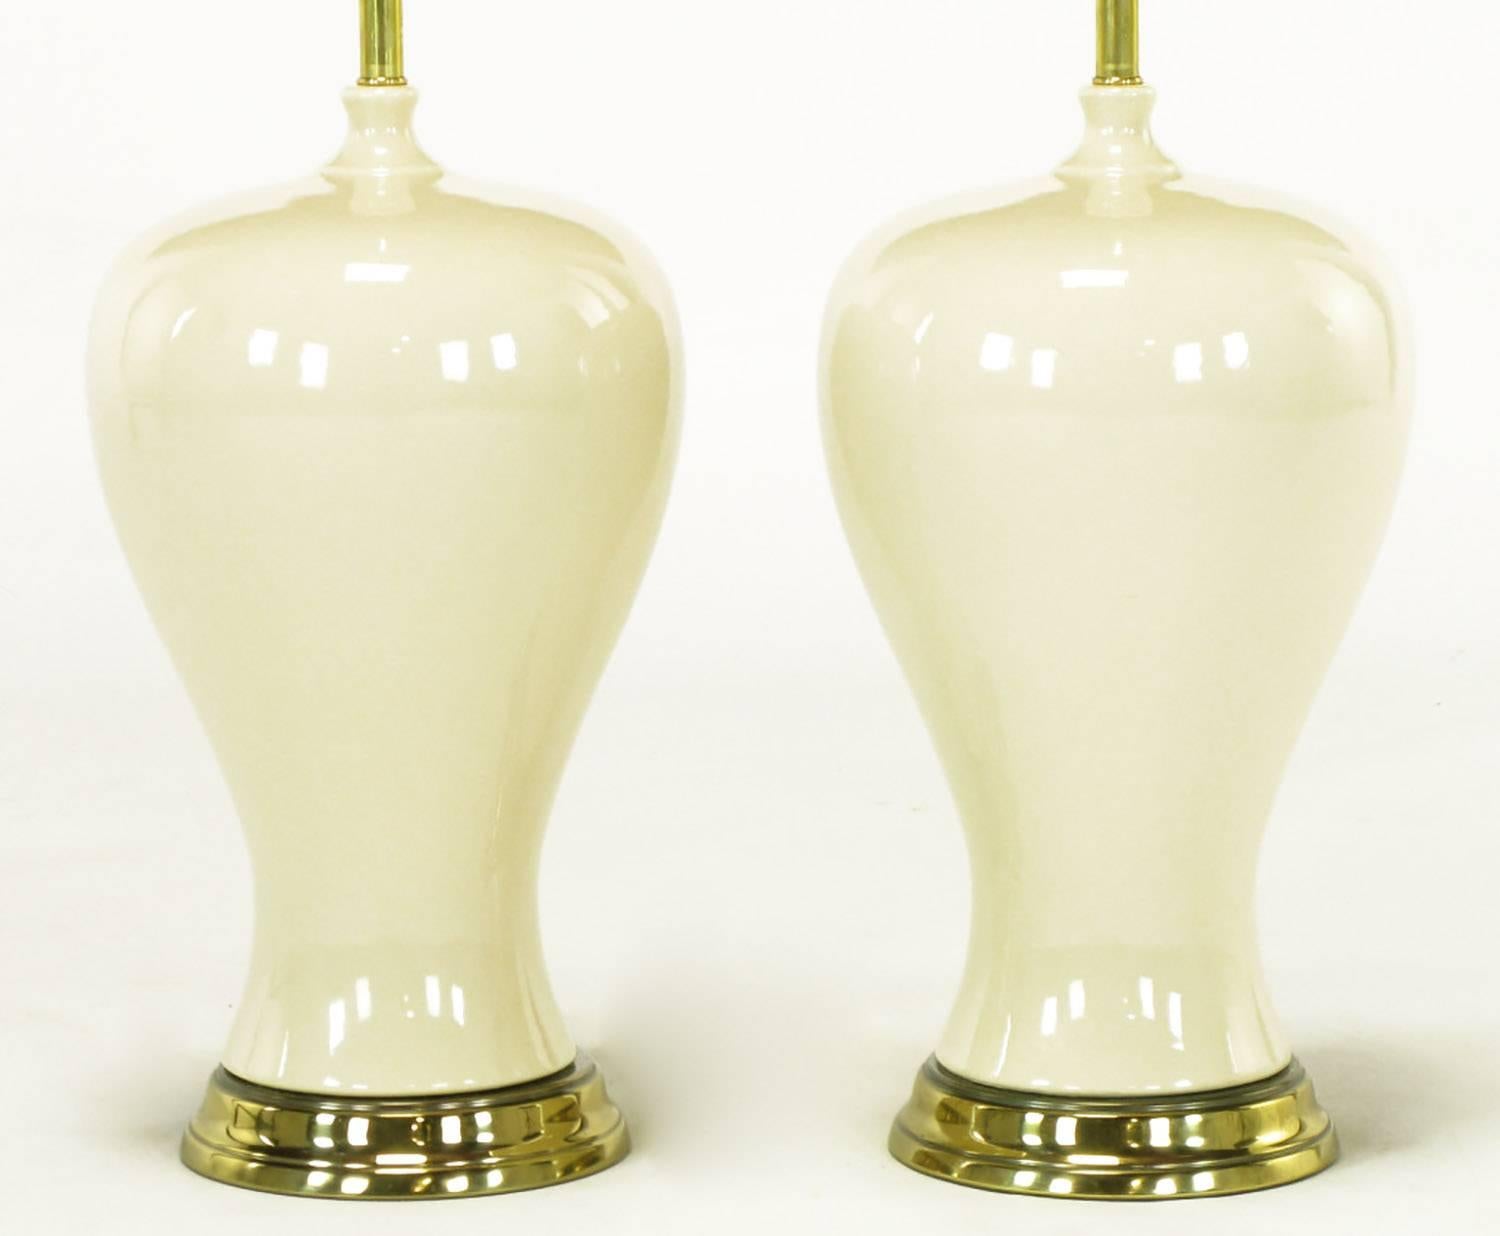 Pair of Ivory Glazed Curvaceous Vase Form Ceramic Table Lamps In Excellent Condition For Sale In Chicago, IL